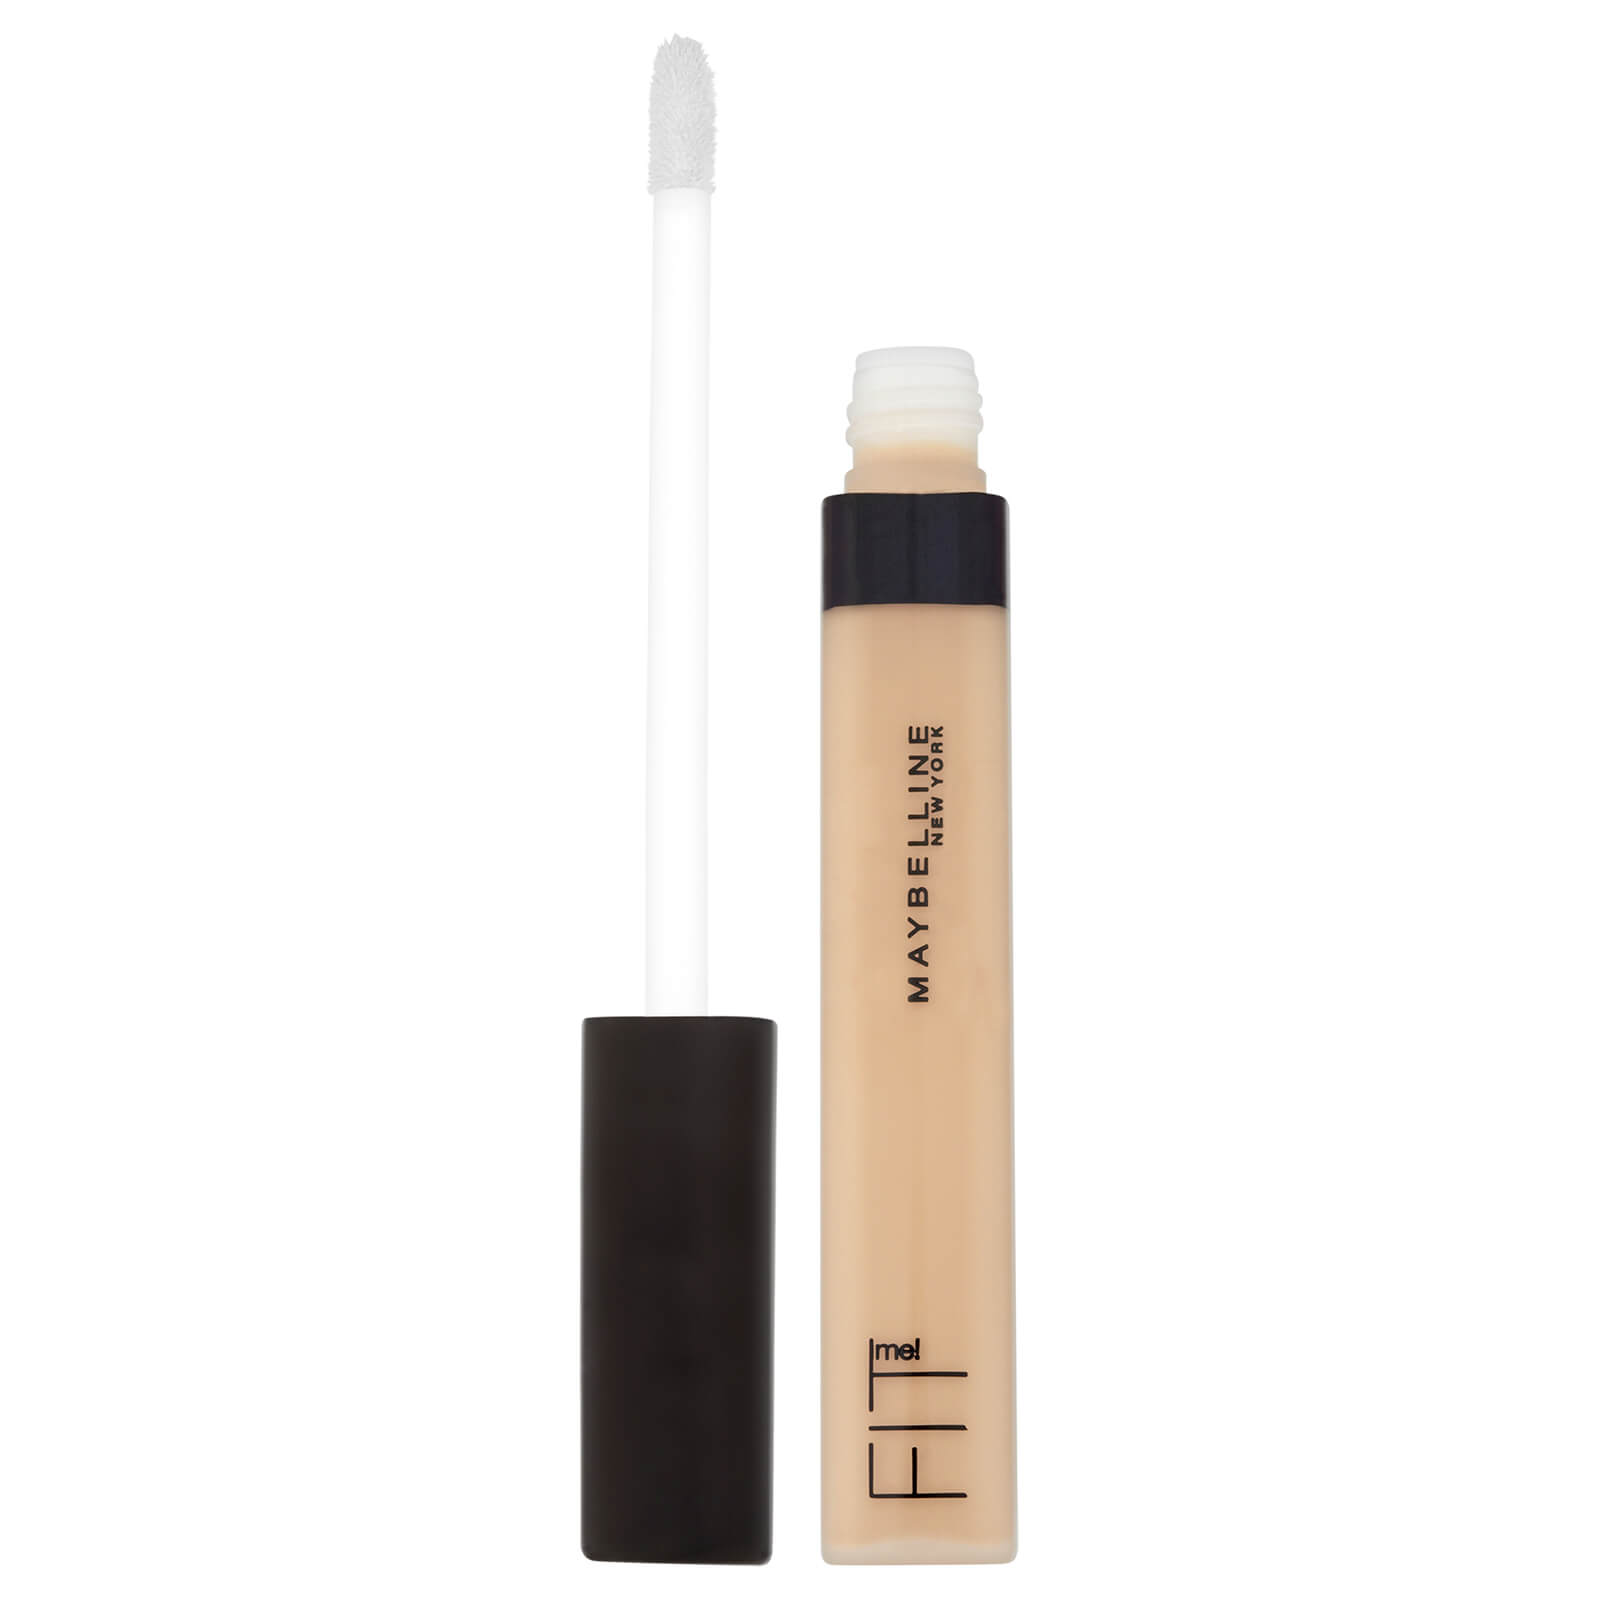 Maybelline Fit Me! Concealer 6.8ml (Various Shades) - 10 Light